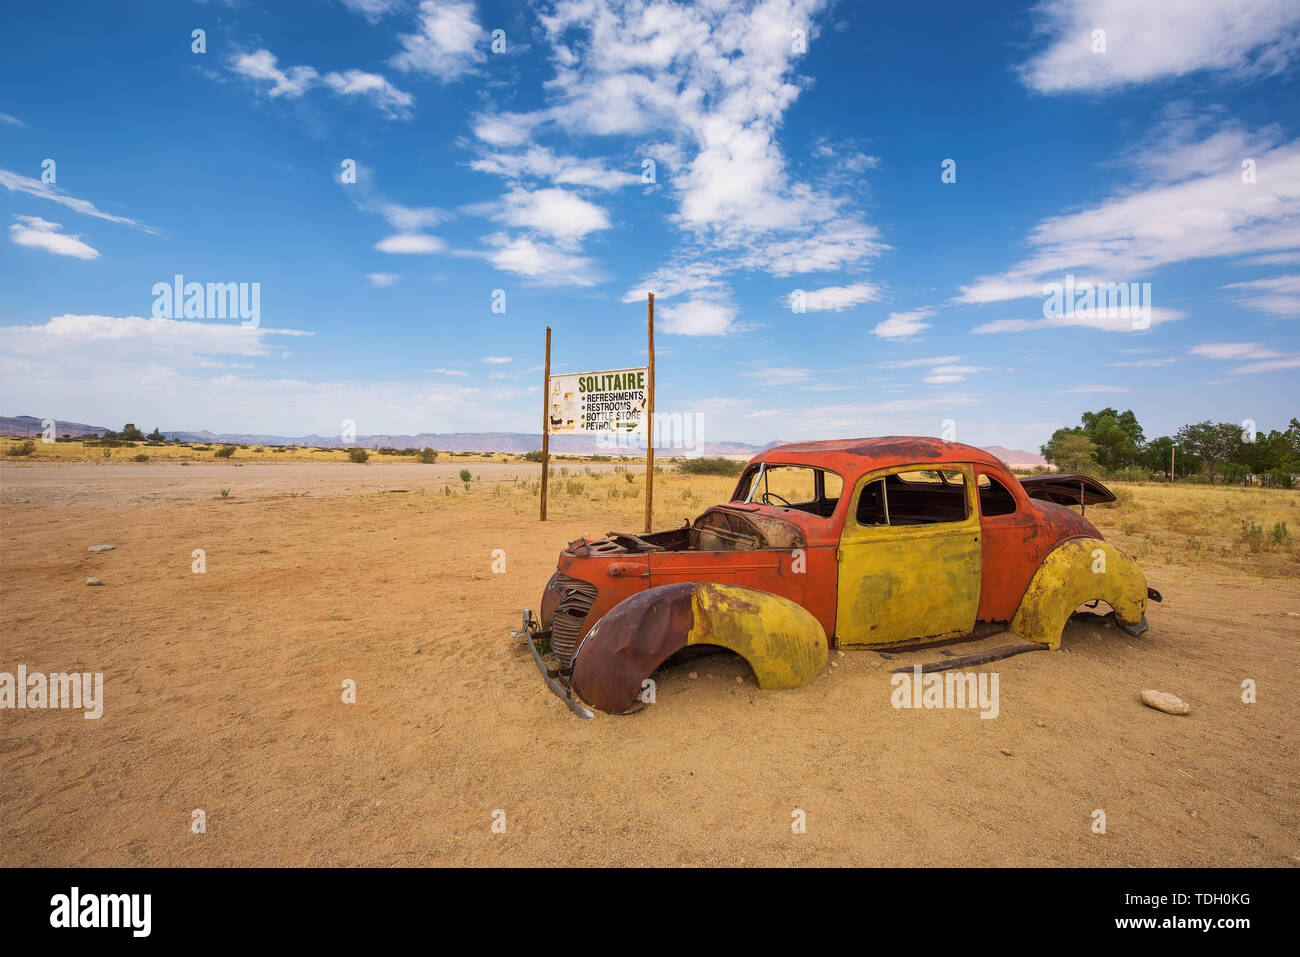 Abandoned car wreck in Solitaire located in the Namib Desert of Namibia Stock Photo